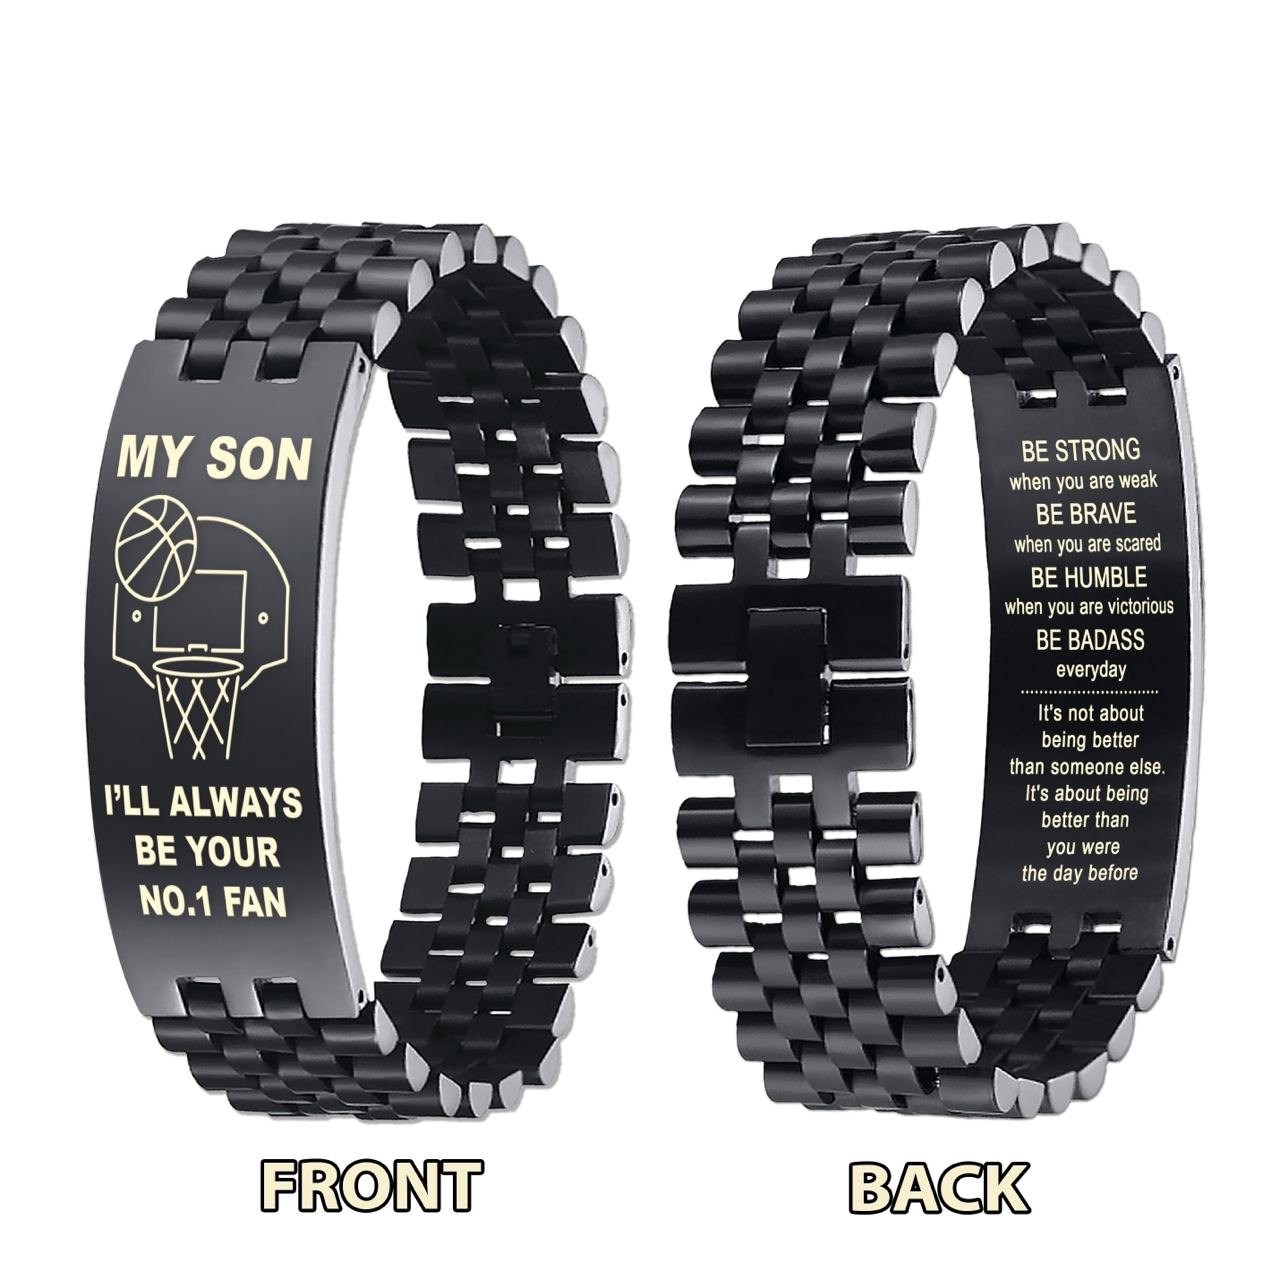 DS3 Customizable basketball bracelet, gifts from dad mom to son- I hope you believe in yourself